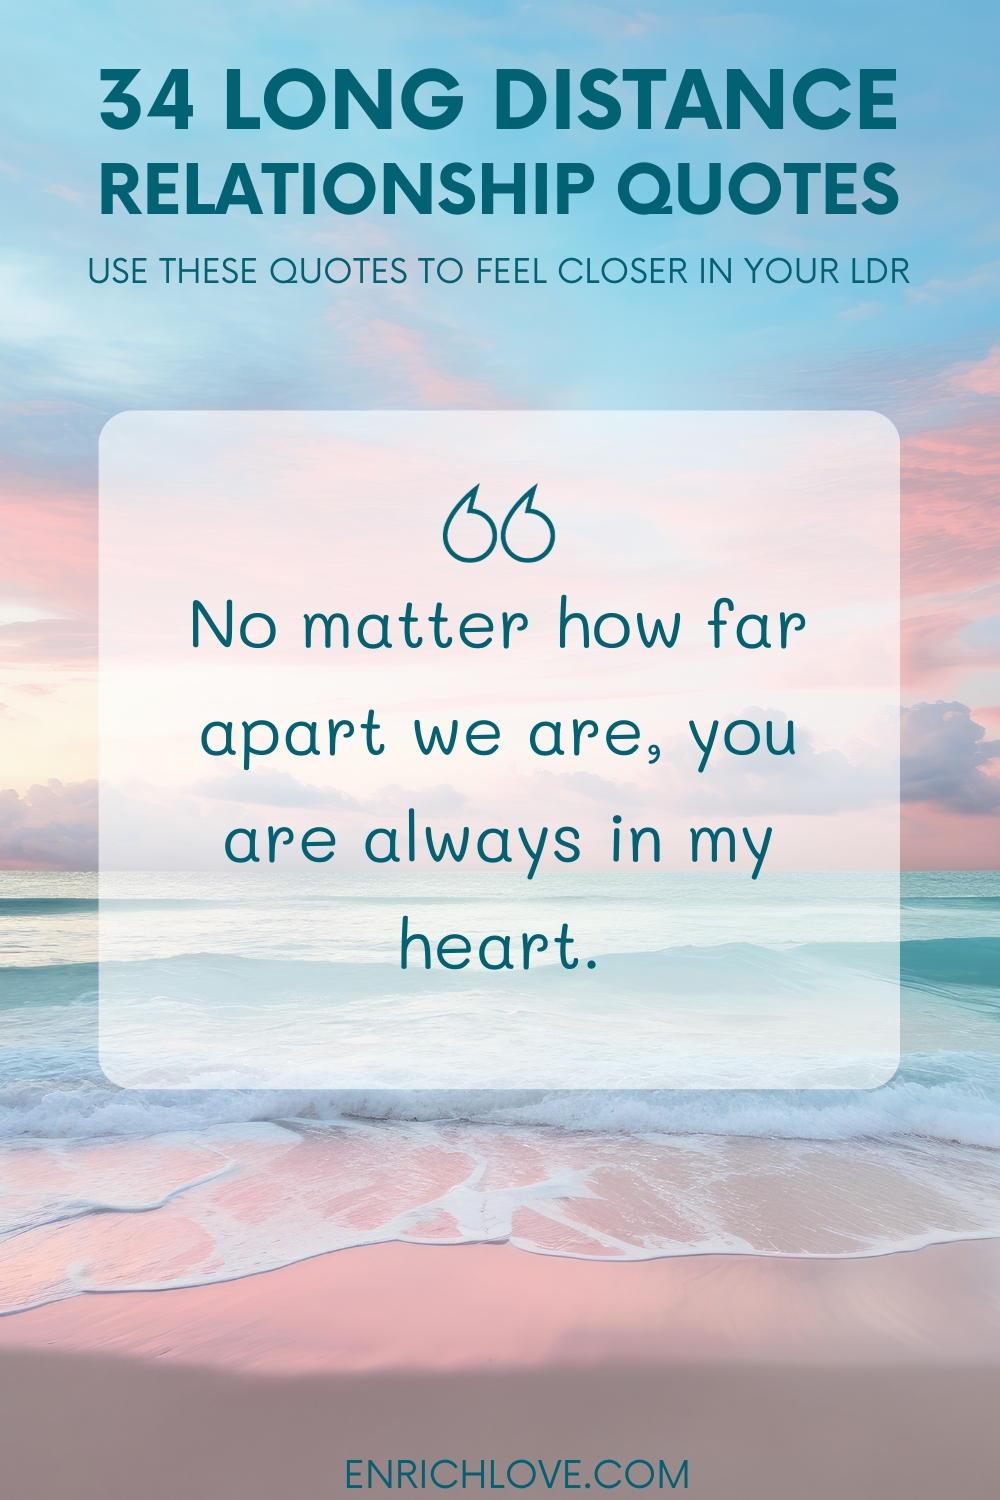 34 Long Distance Relationship Quotes - No matter how far apart we are, you are always in my heart.